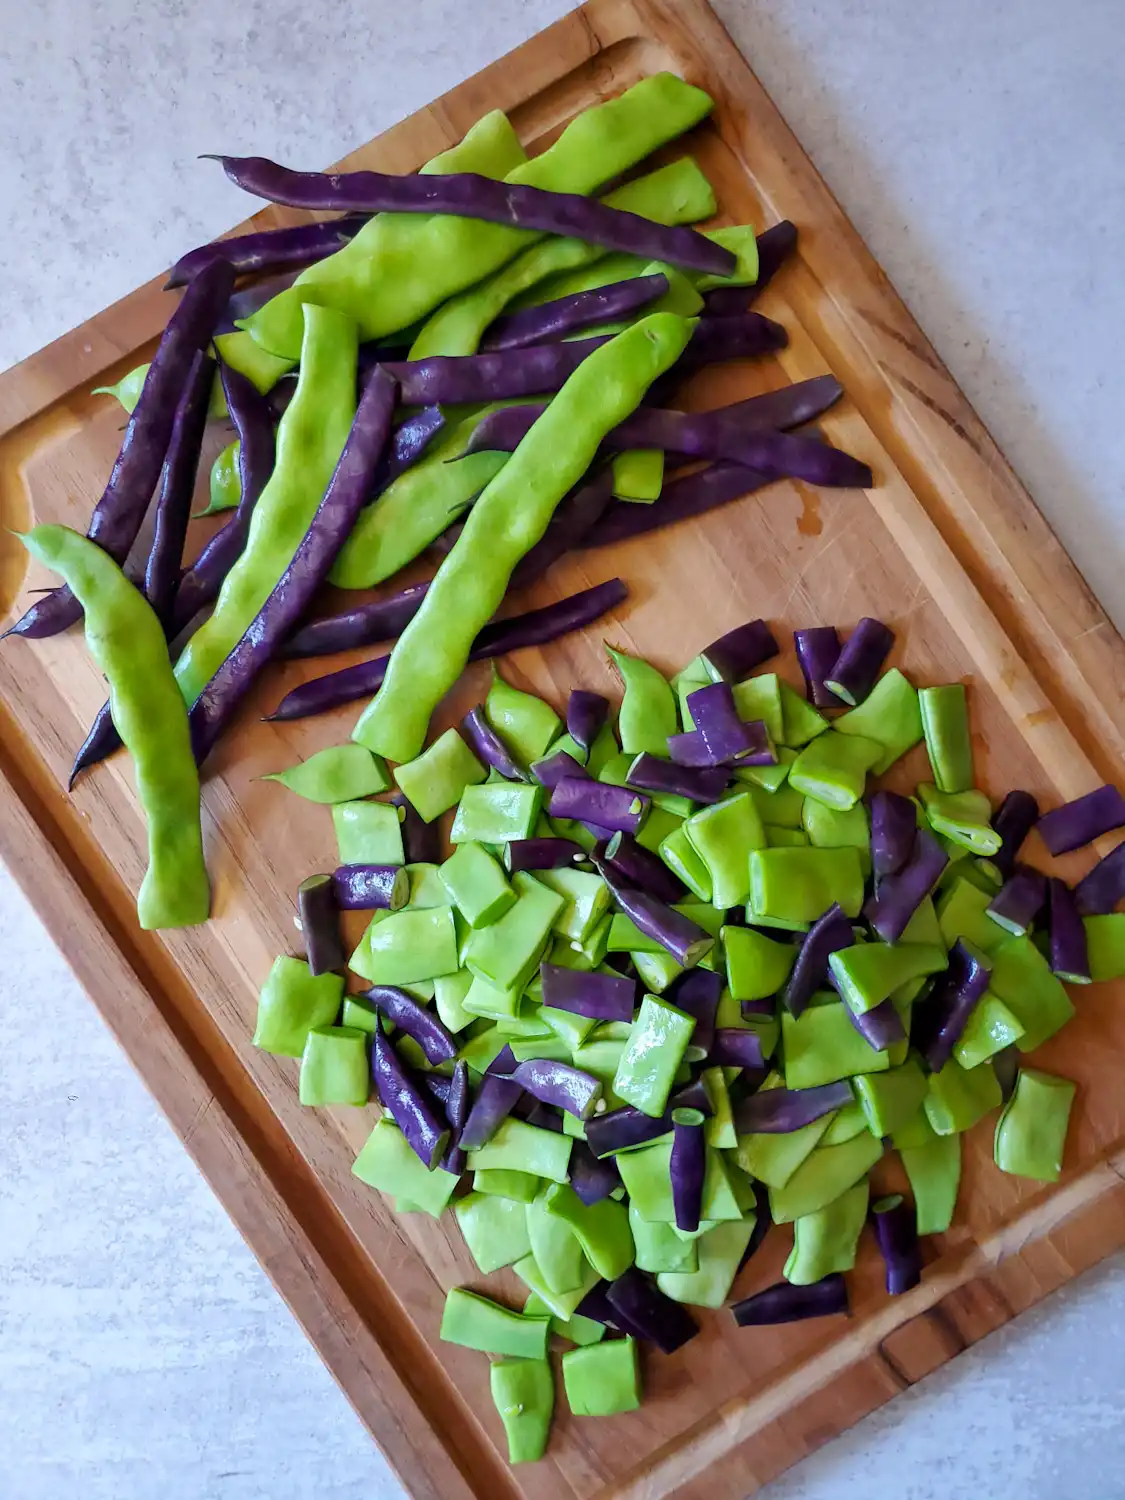 A wooden cutting board covered in purple and green veggies, half of them have been left whole while the other half have been cut into pieces. 